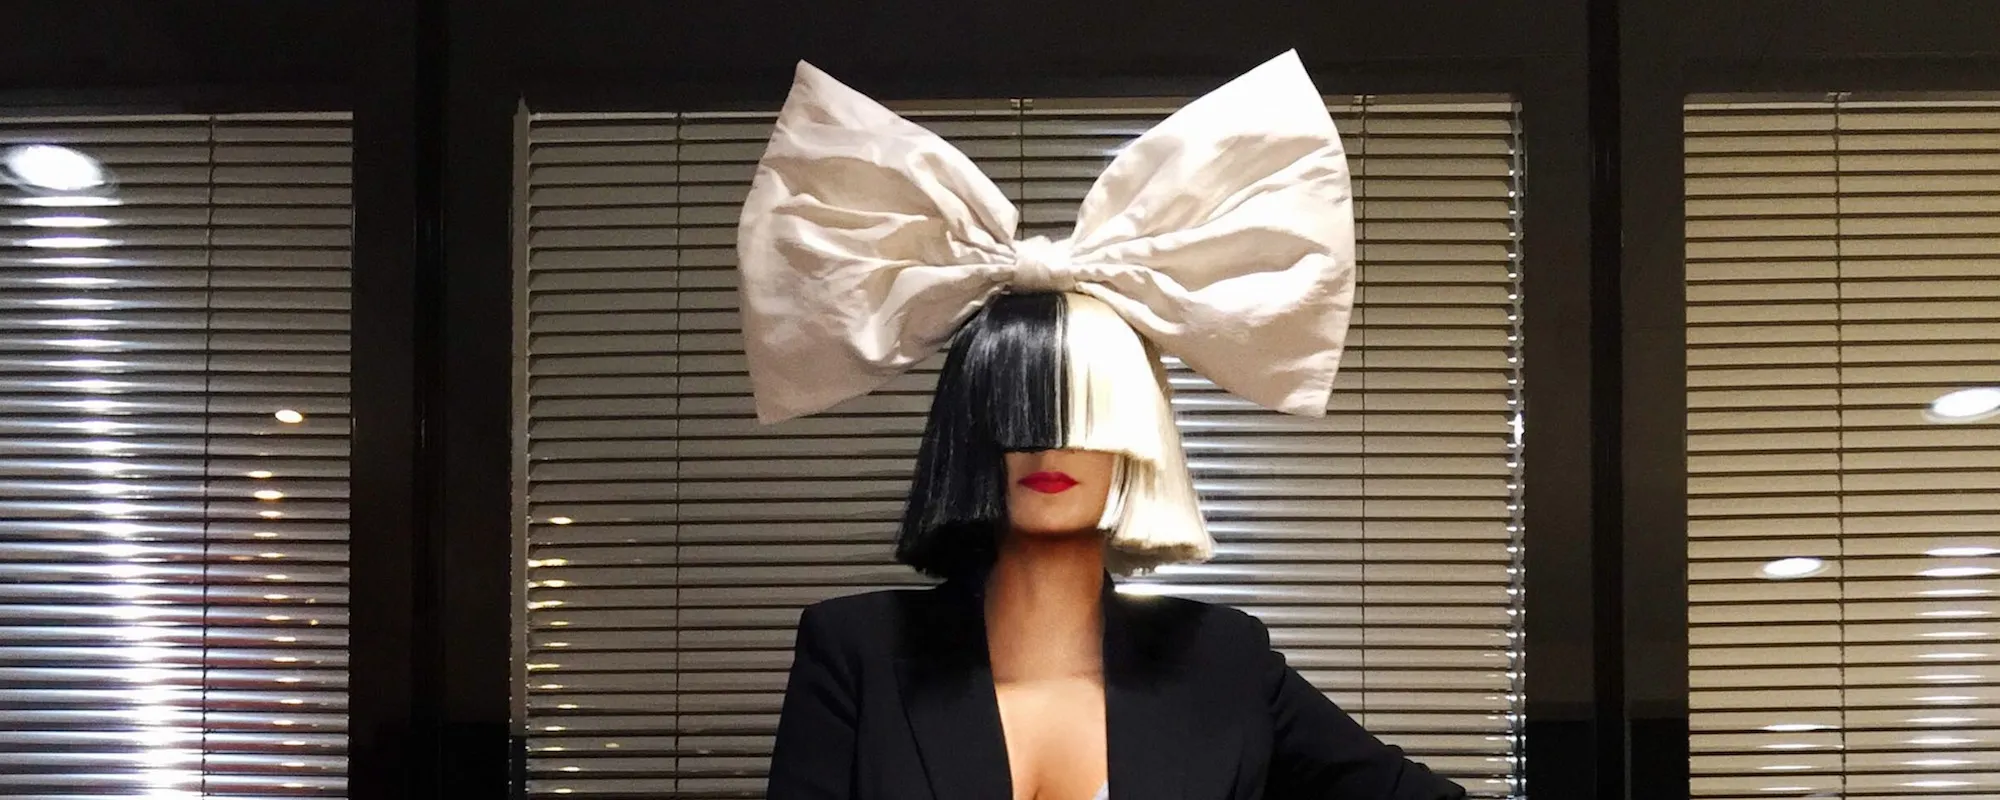 10 Songs You Didn’t Know Sia Wrote